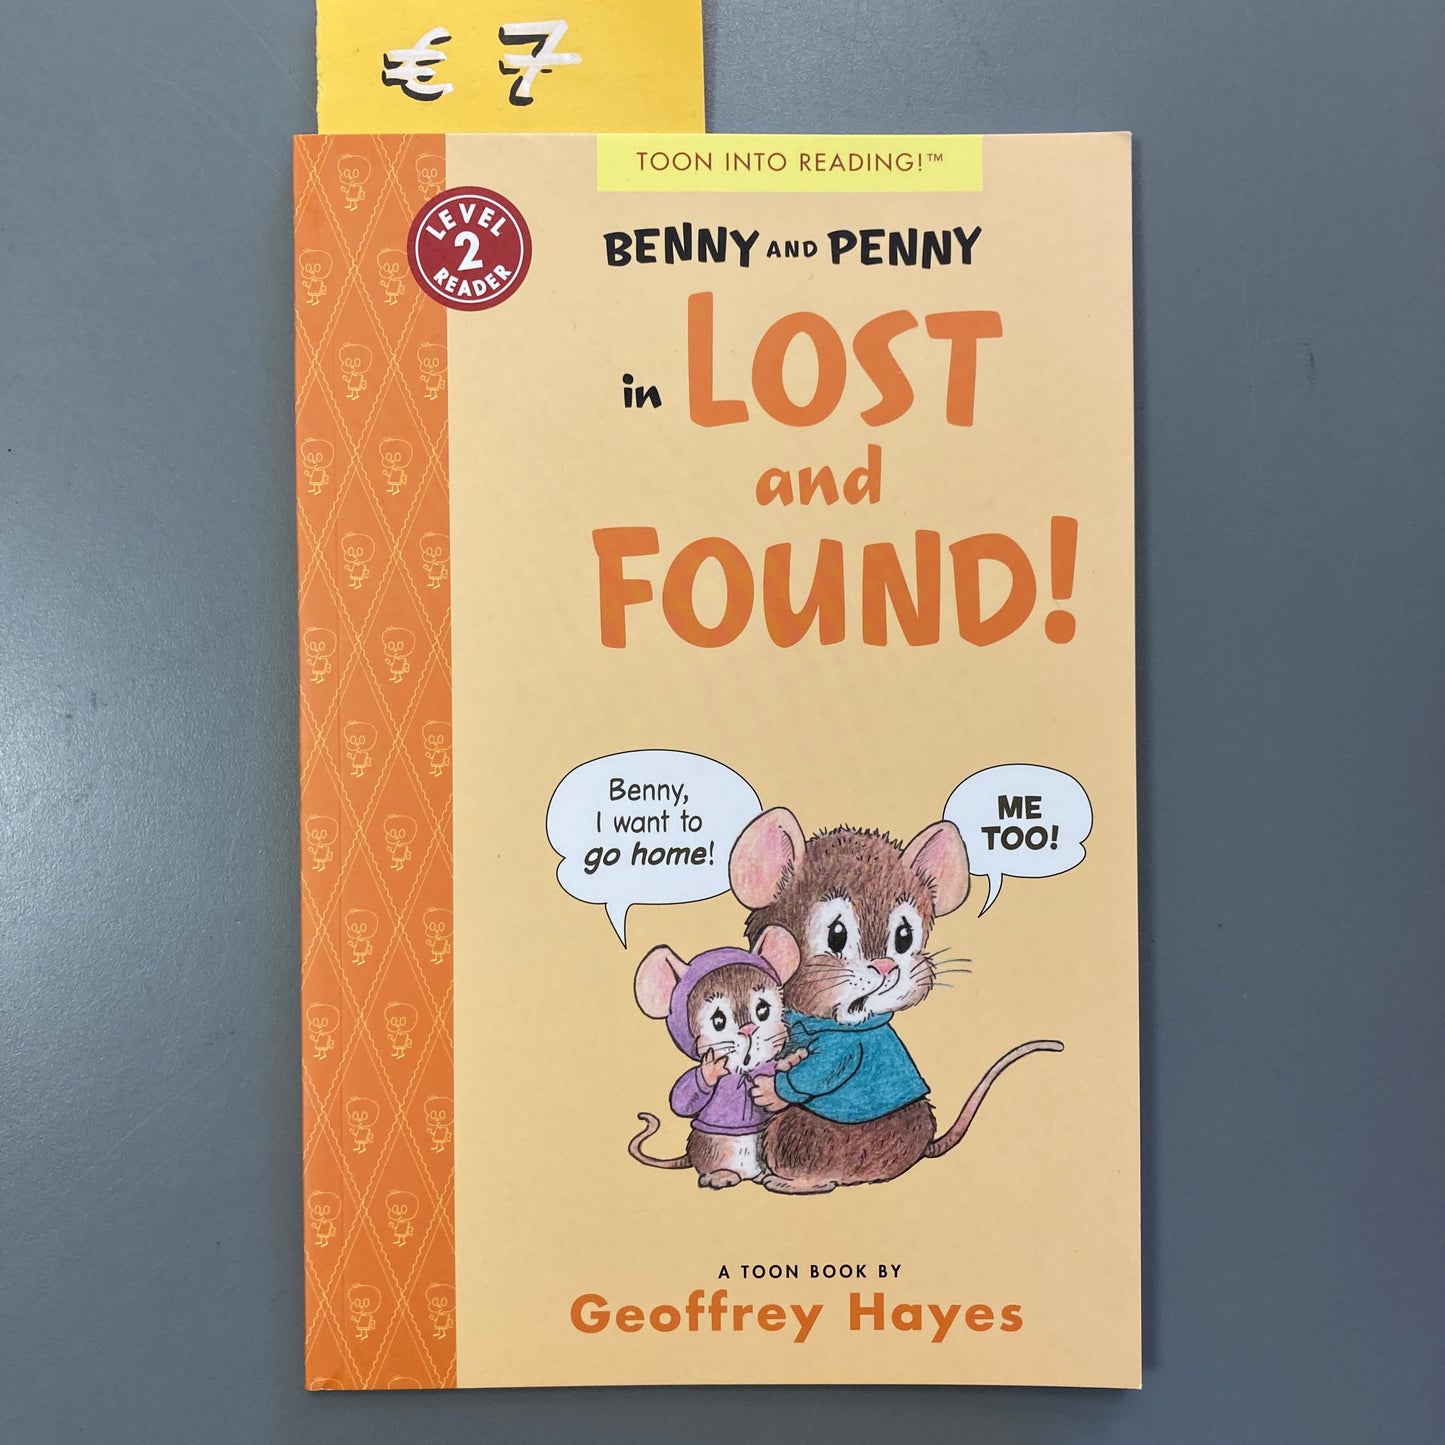 Benny and Penny in: Lost and Found!